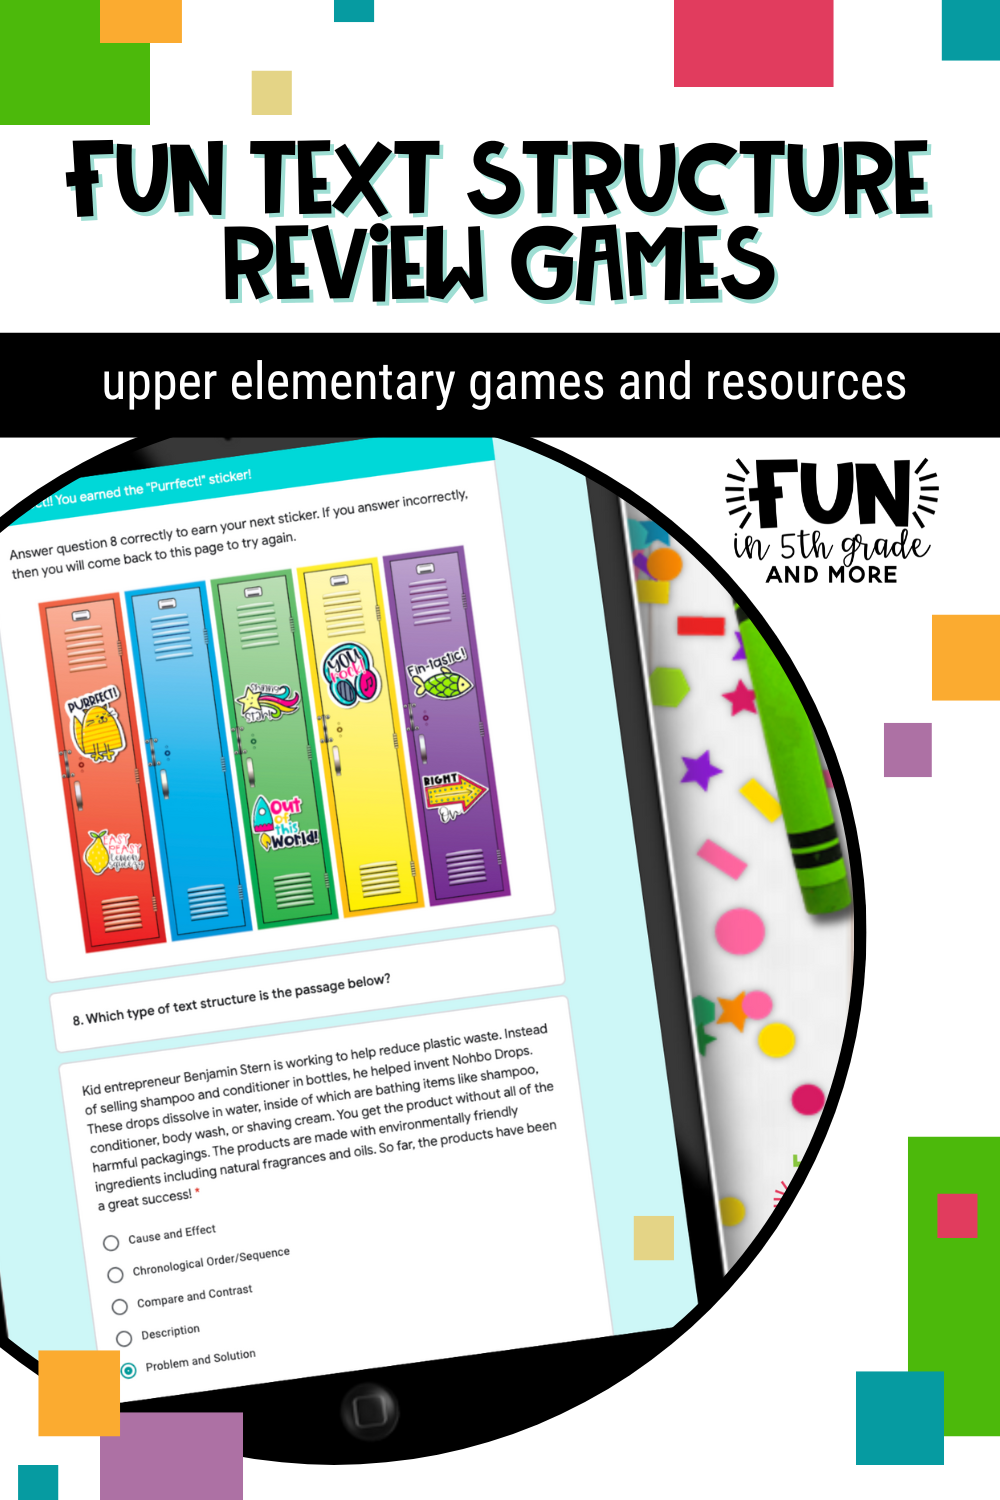 Fun Text Structure Review Games Pinterest Image